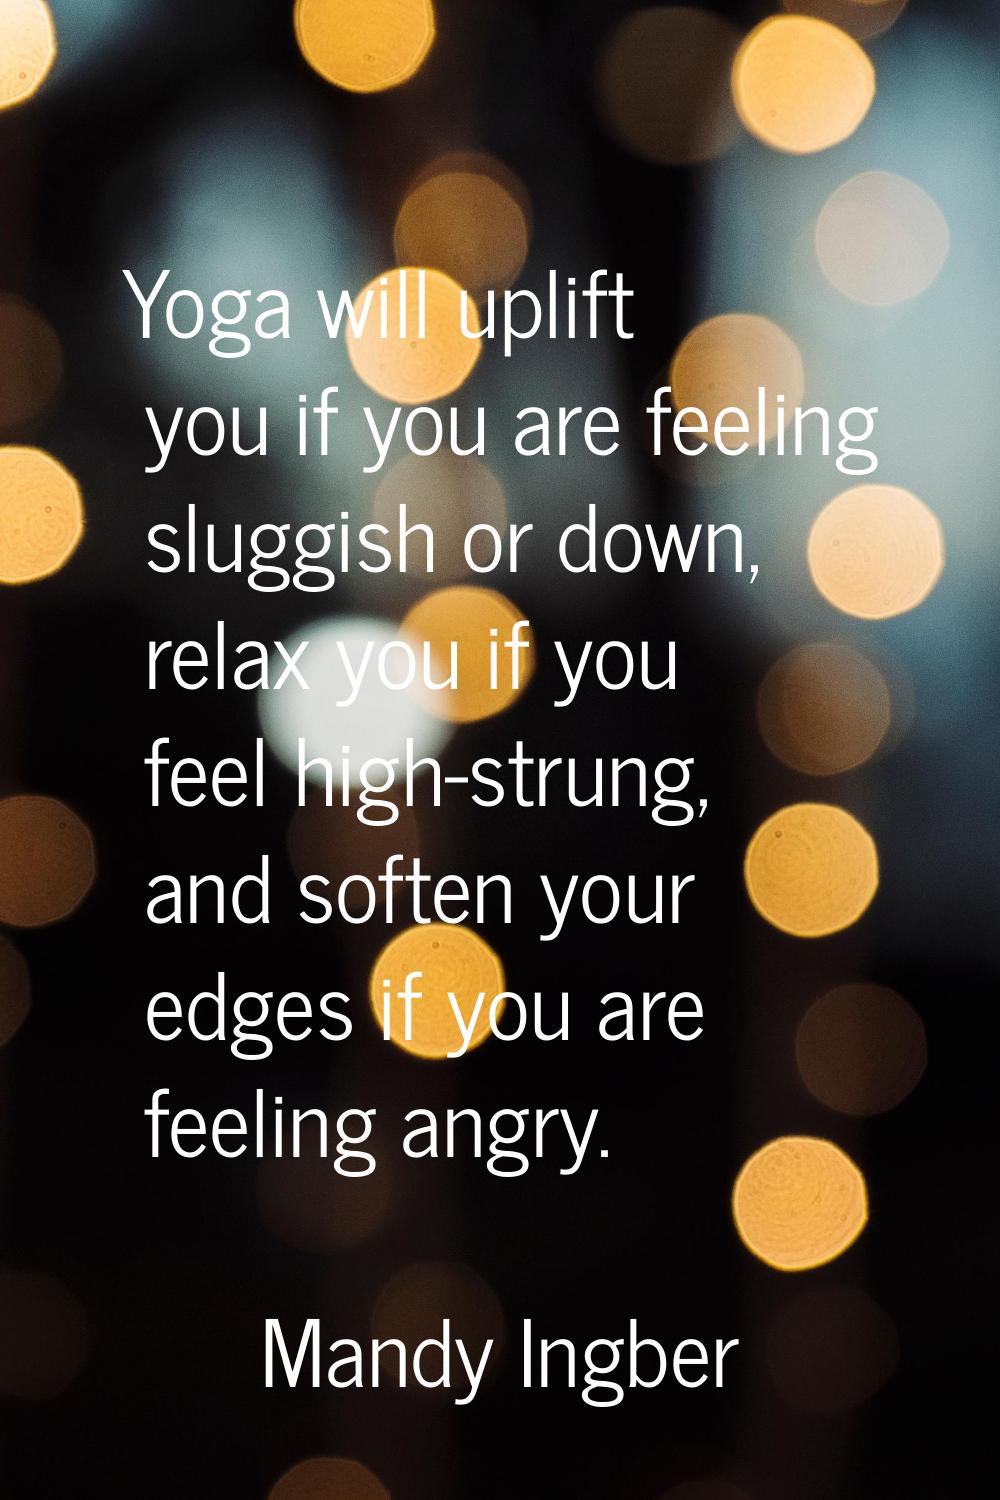 Yoga will uplift you if you are feeling sluggish or down, relax you if you feel high-strung, and so